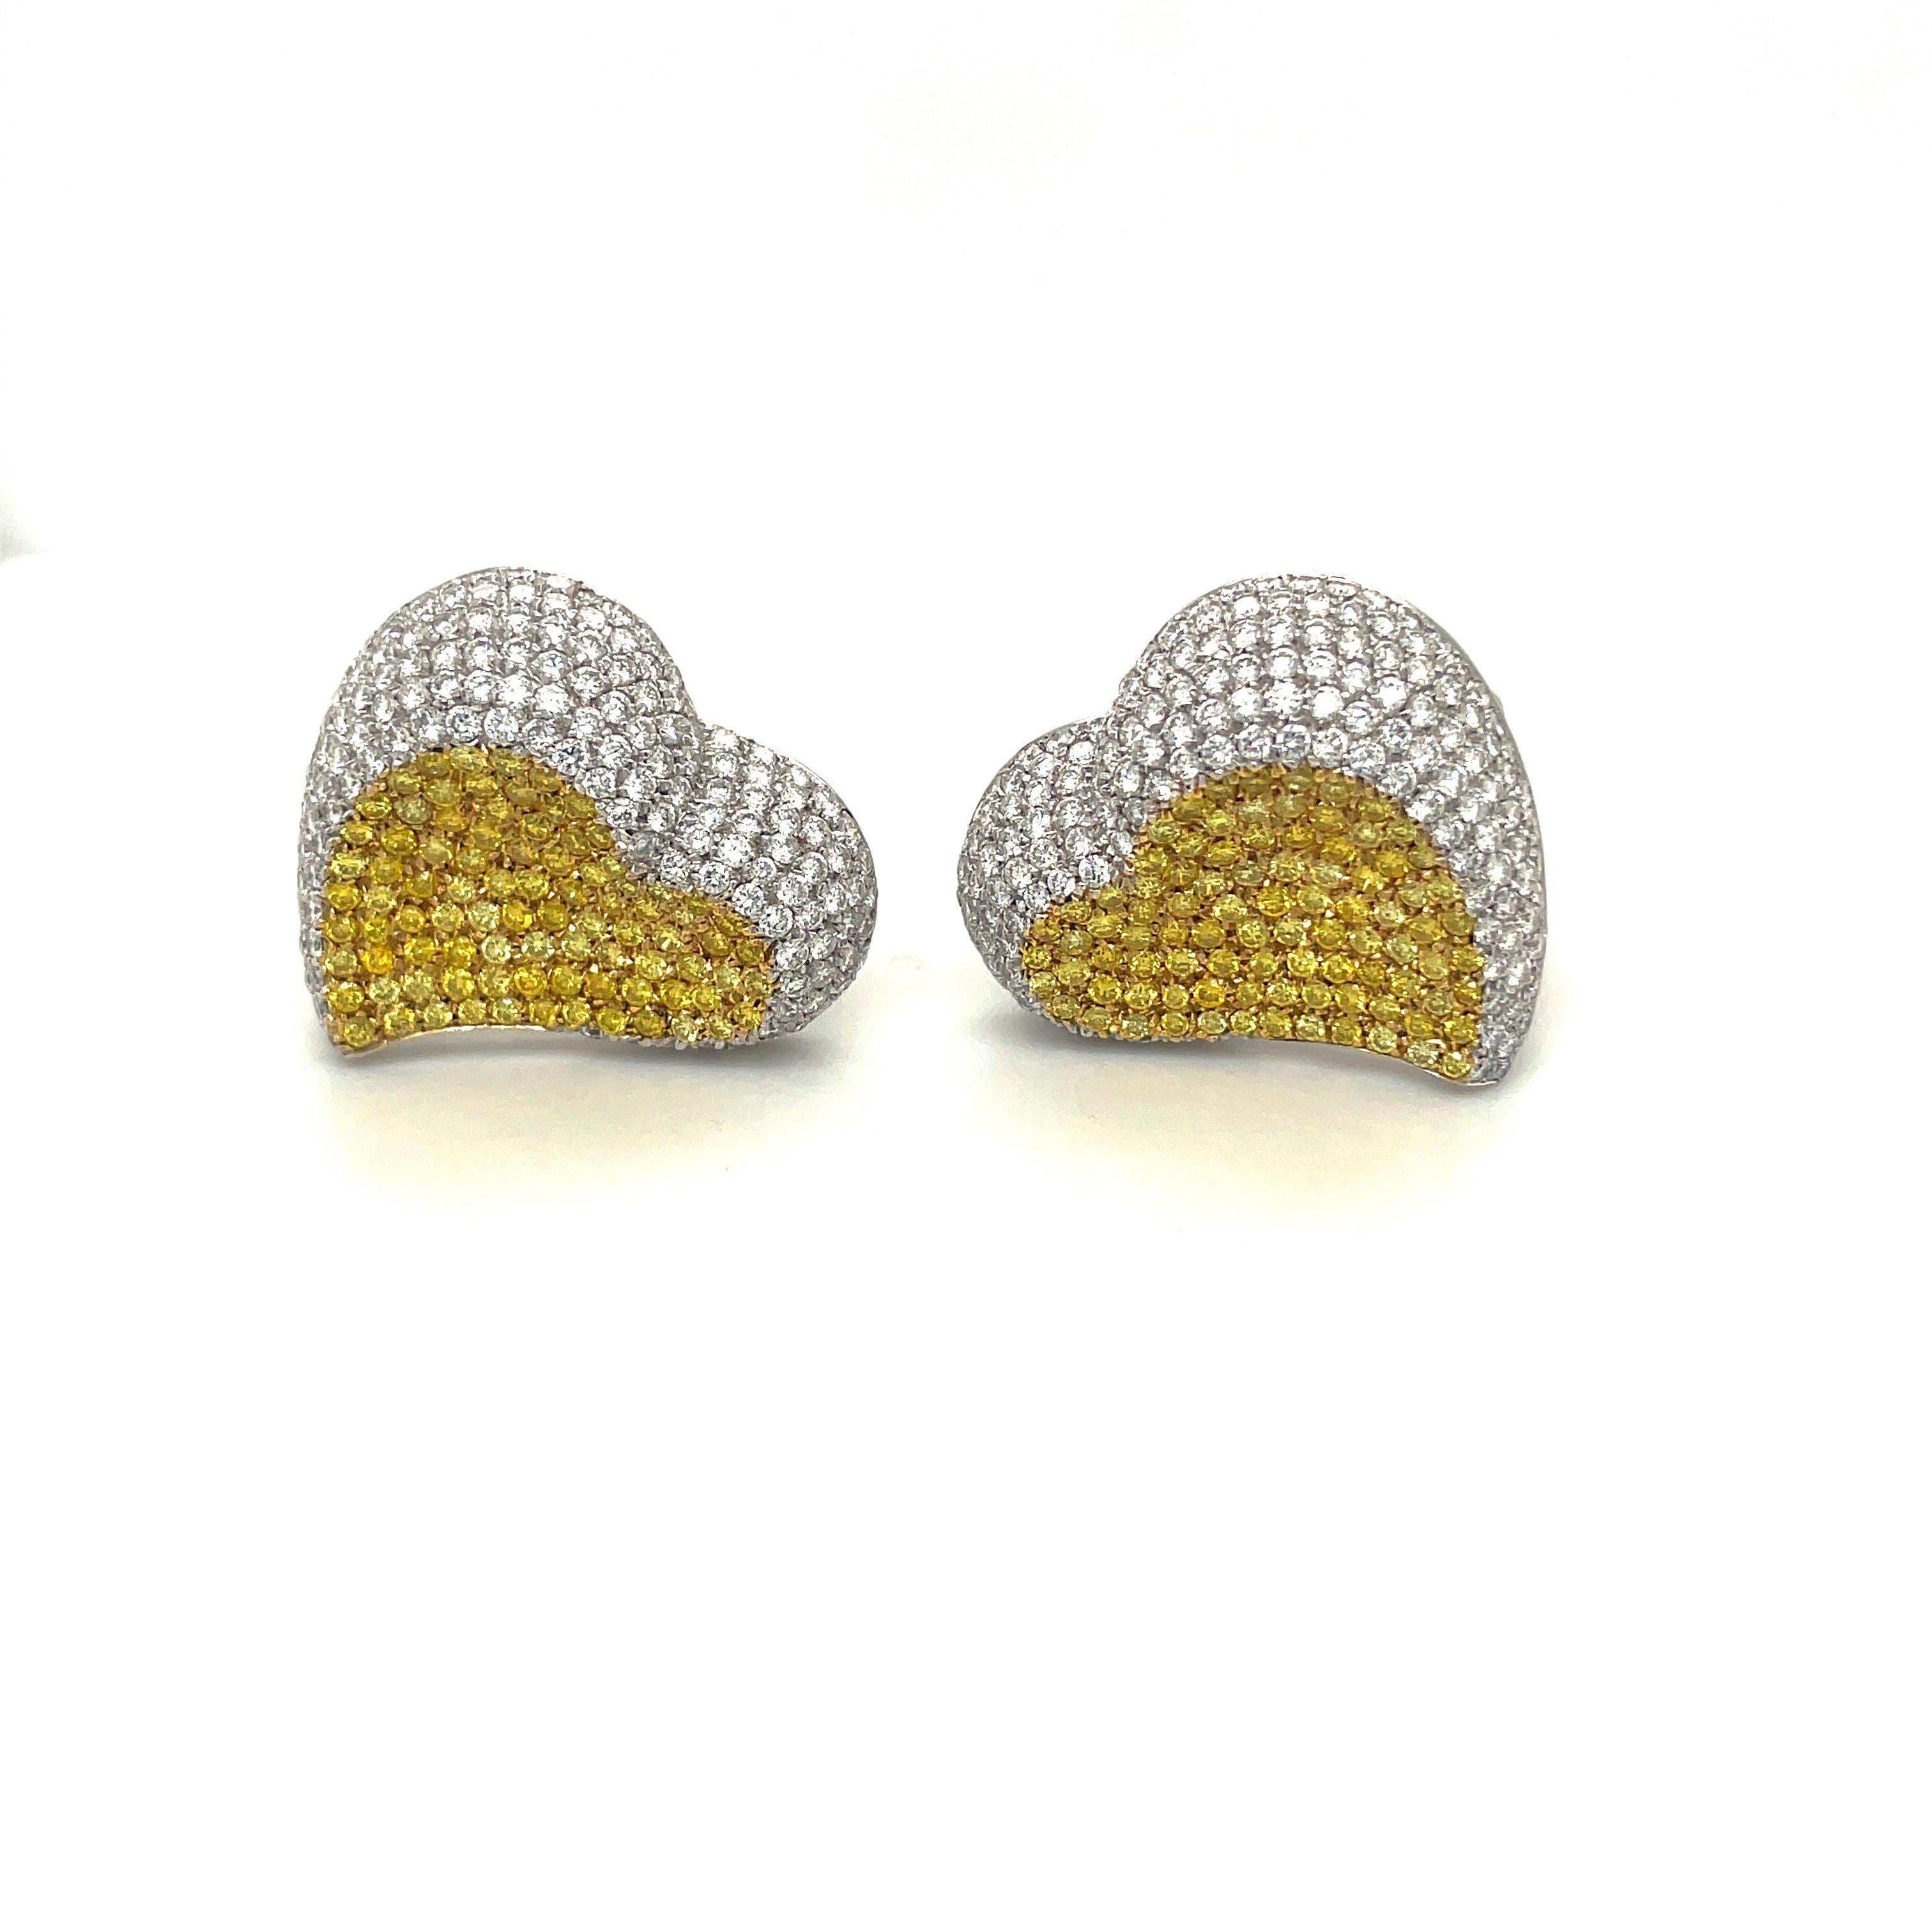 Round Cut Cellini 6.16ct. Yellow and White Diamond Heart Earrings in 18kt Gold For Sale